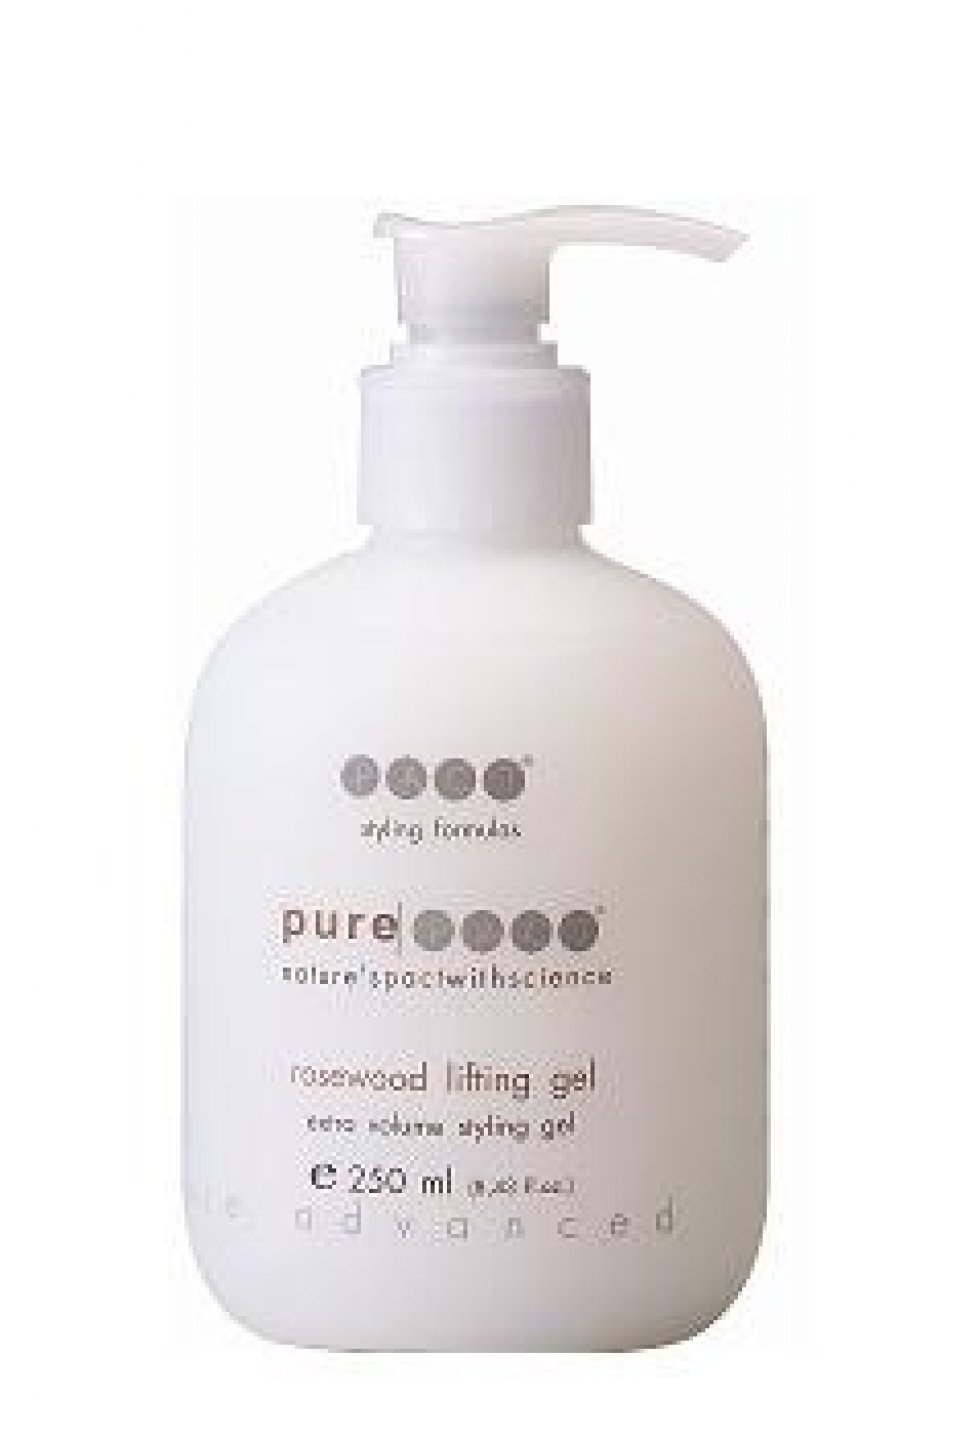 Pure Pact Rosewood Lifting Gel